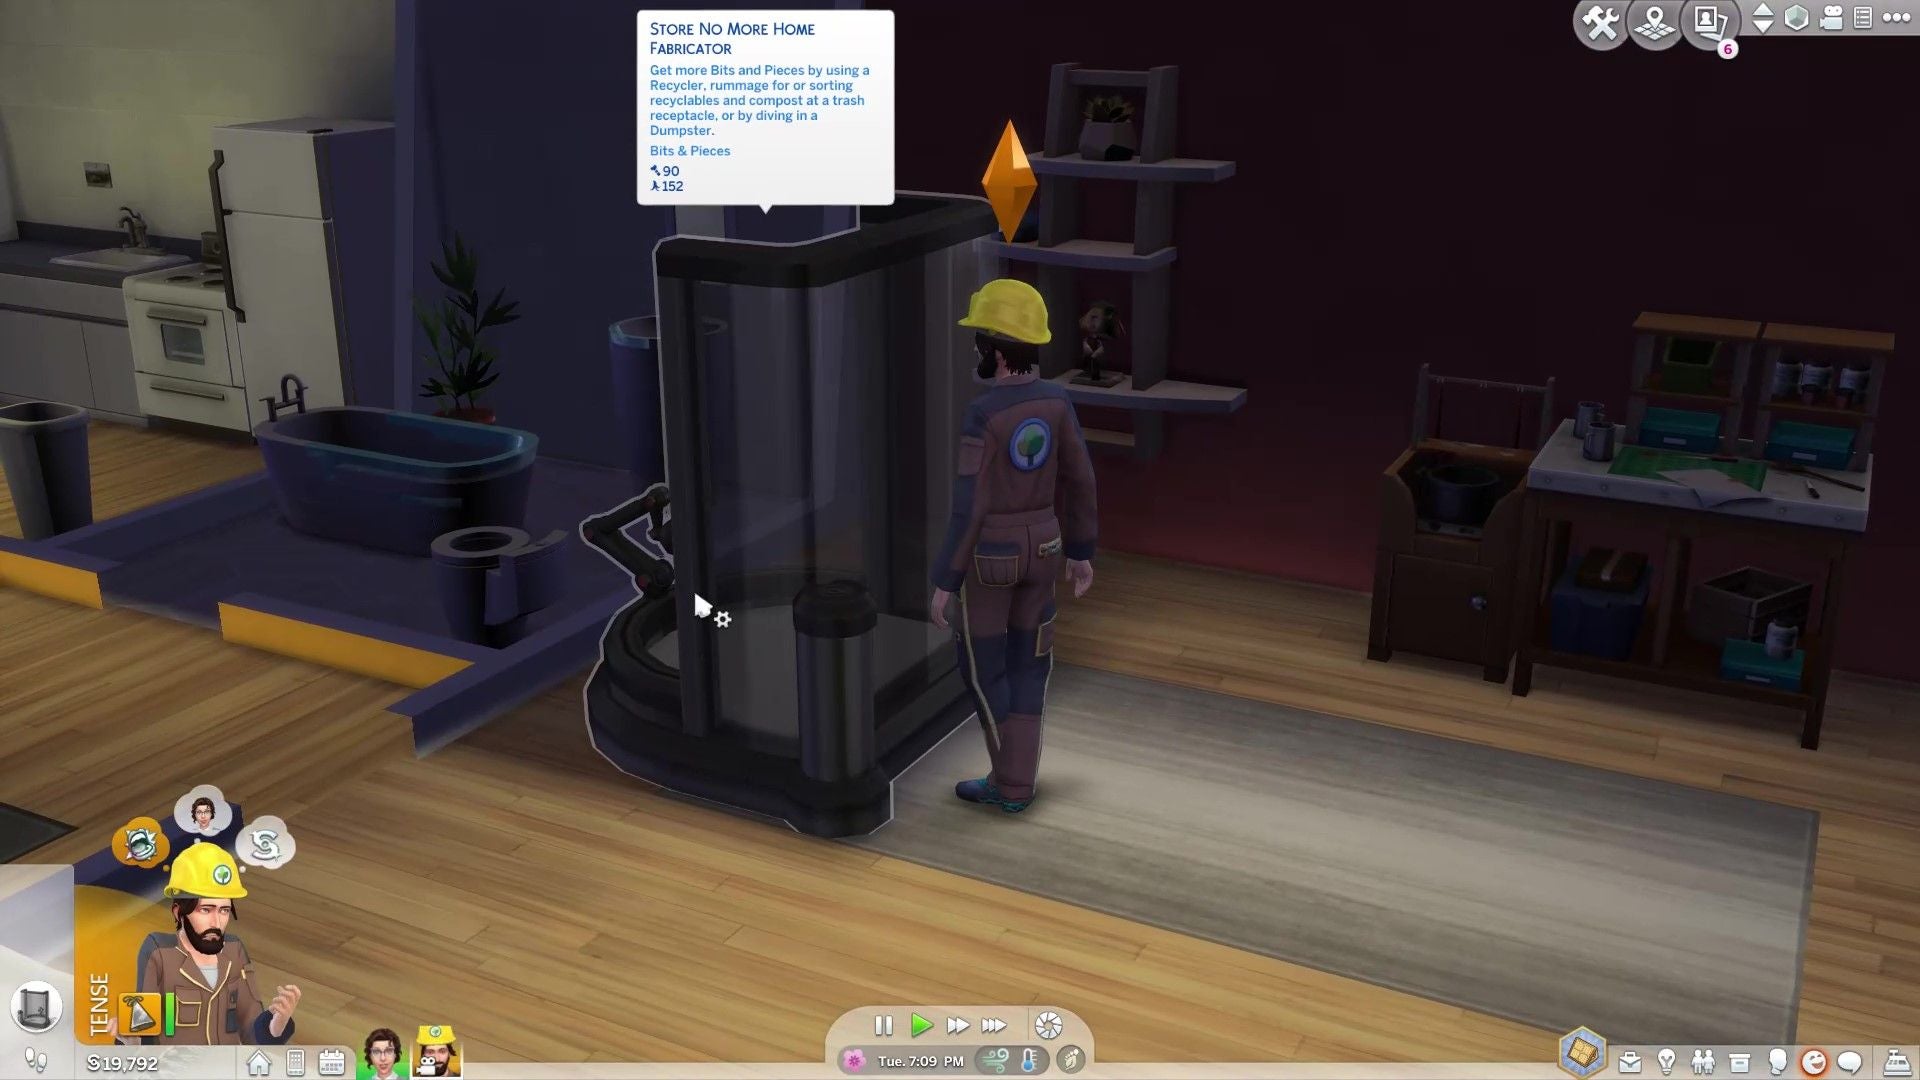 Junior Exchange Characterize The Sims 4 Fabricator guide for how to get Bits and Pieces for the  Fabrication skill in Eco Lifestyle | Eurogamer.net